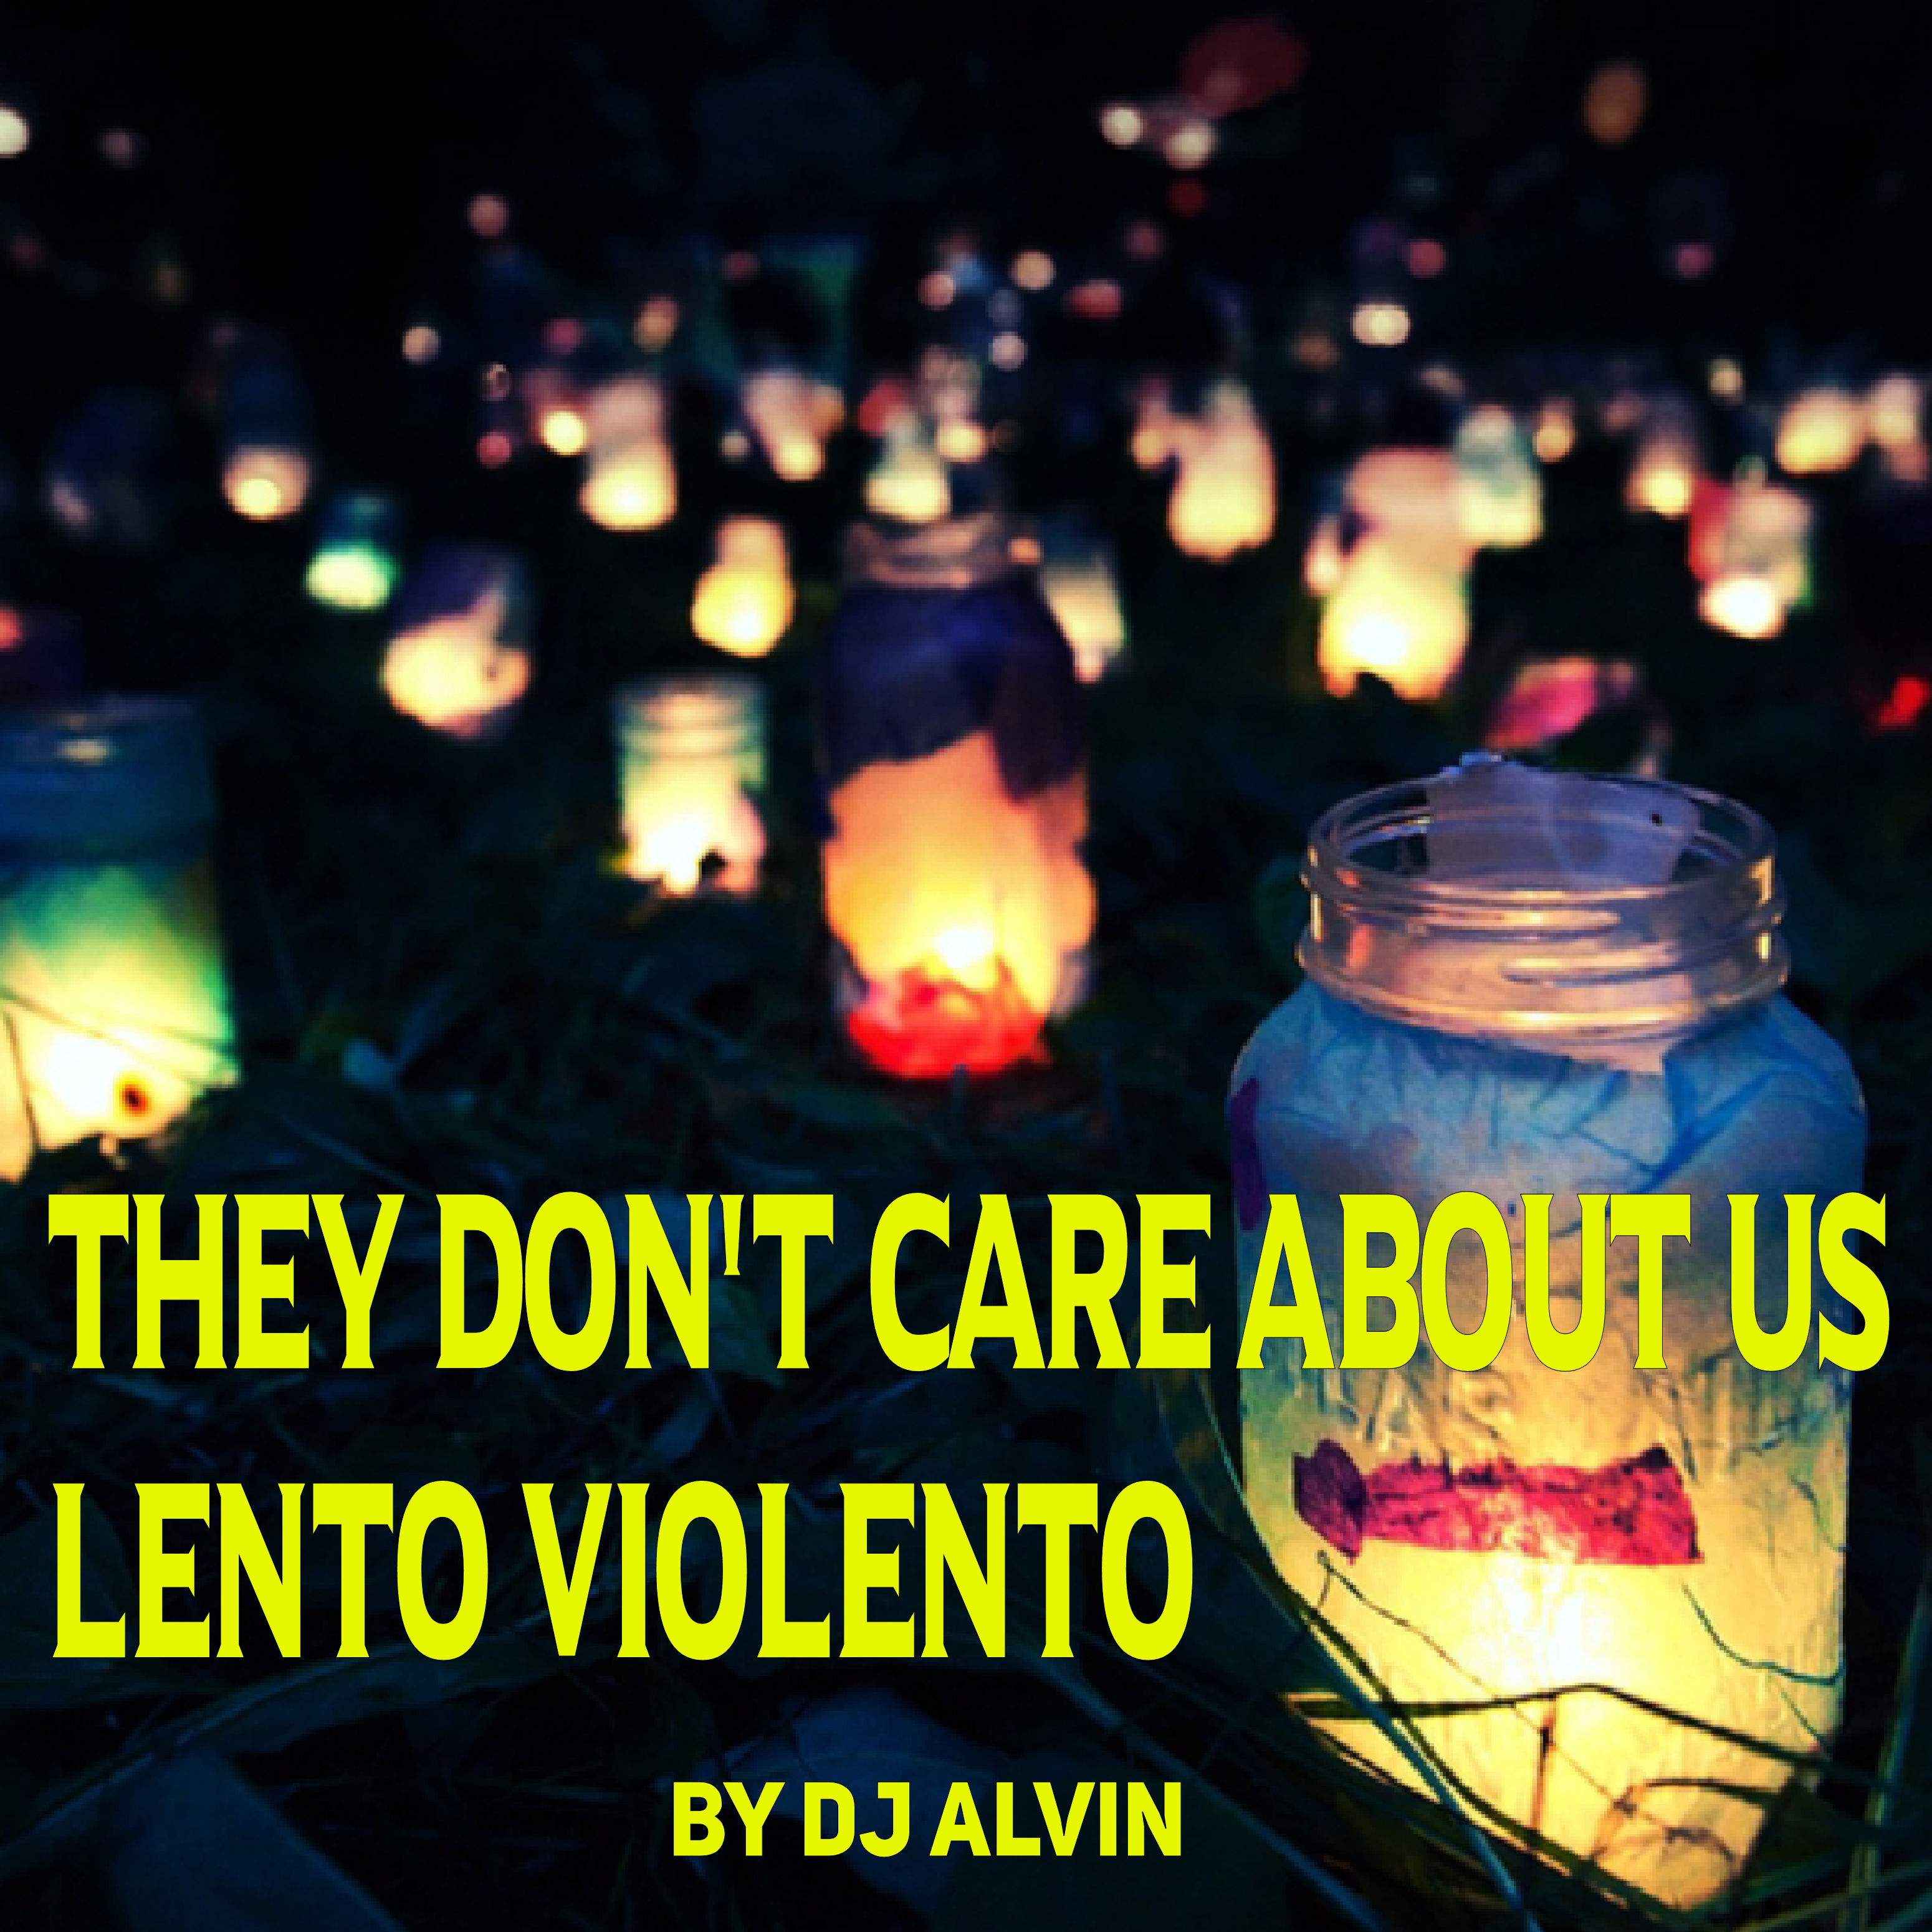 They don't care about us - Lento Violento